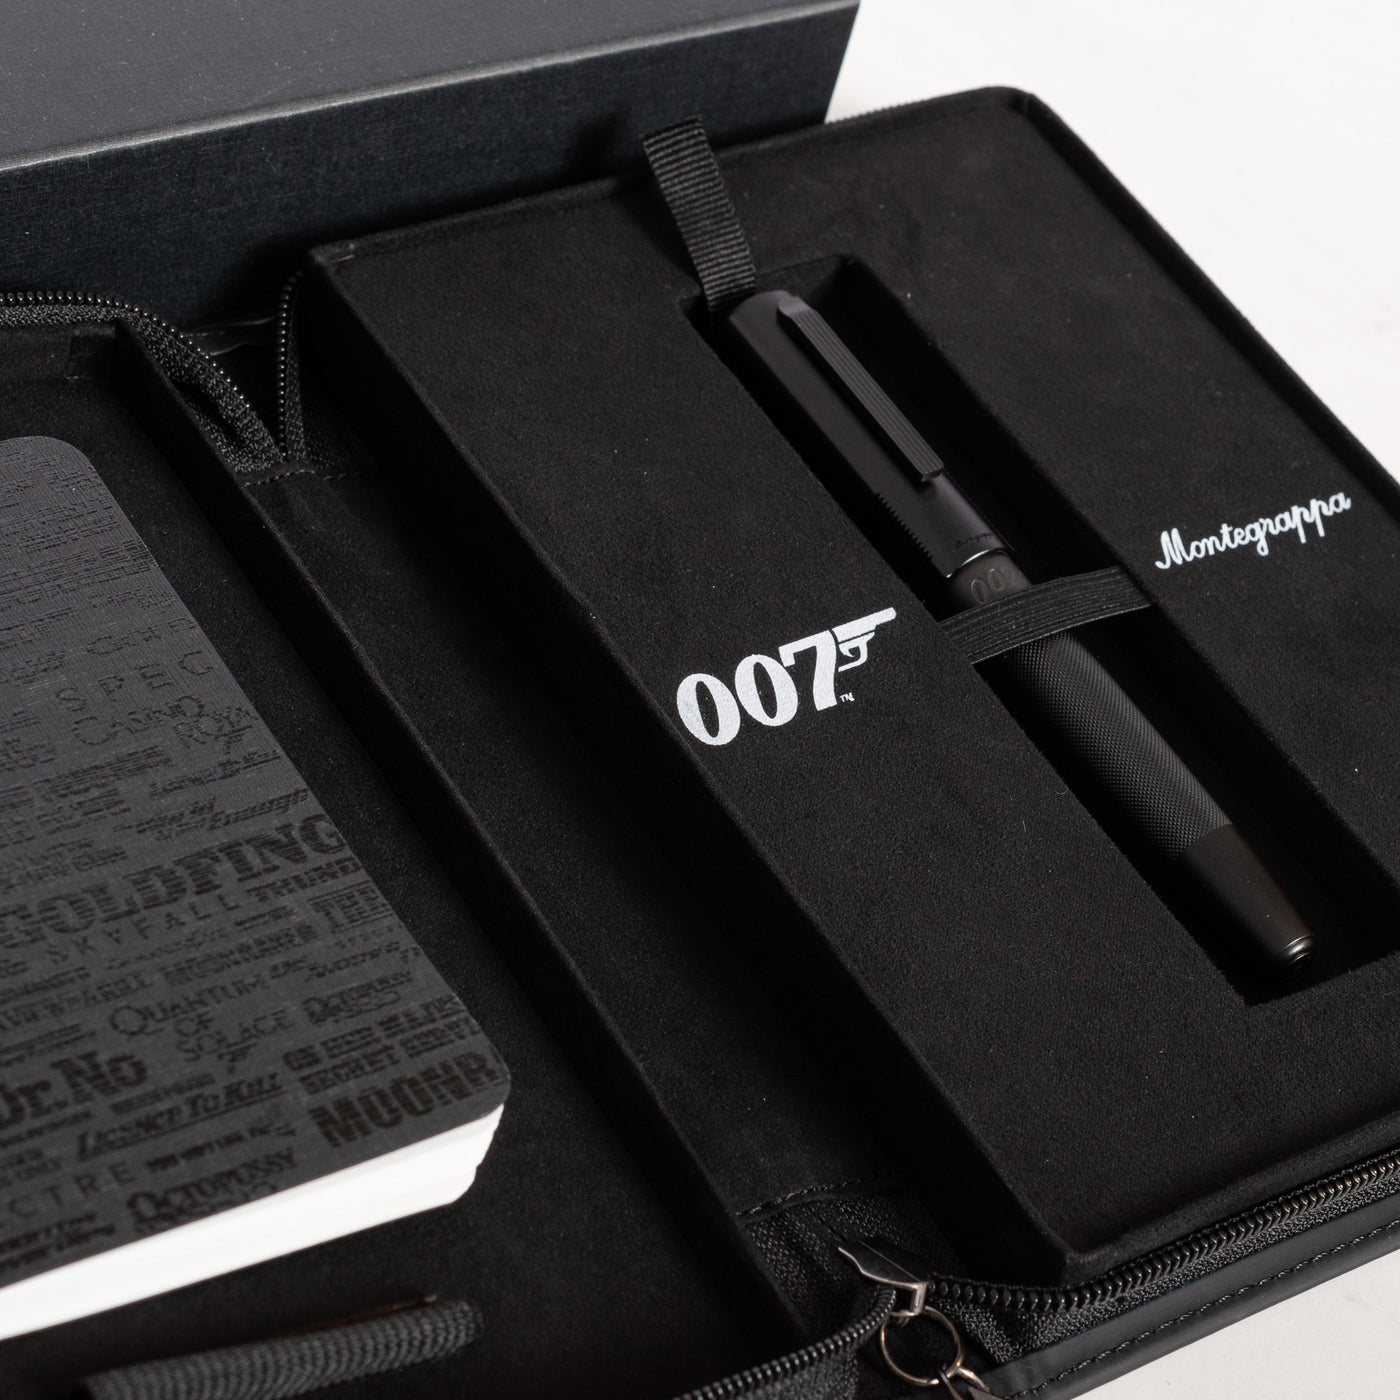 Montegrappa 007 James Bond Special Issue Fountain Pen Packaging